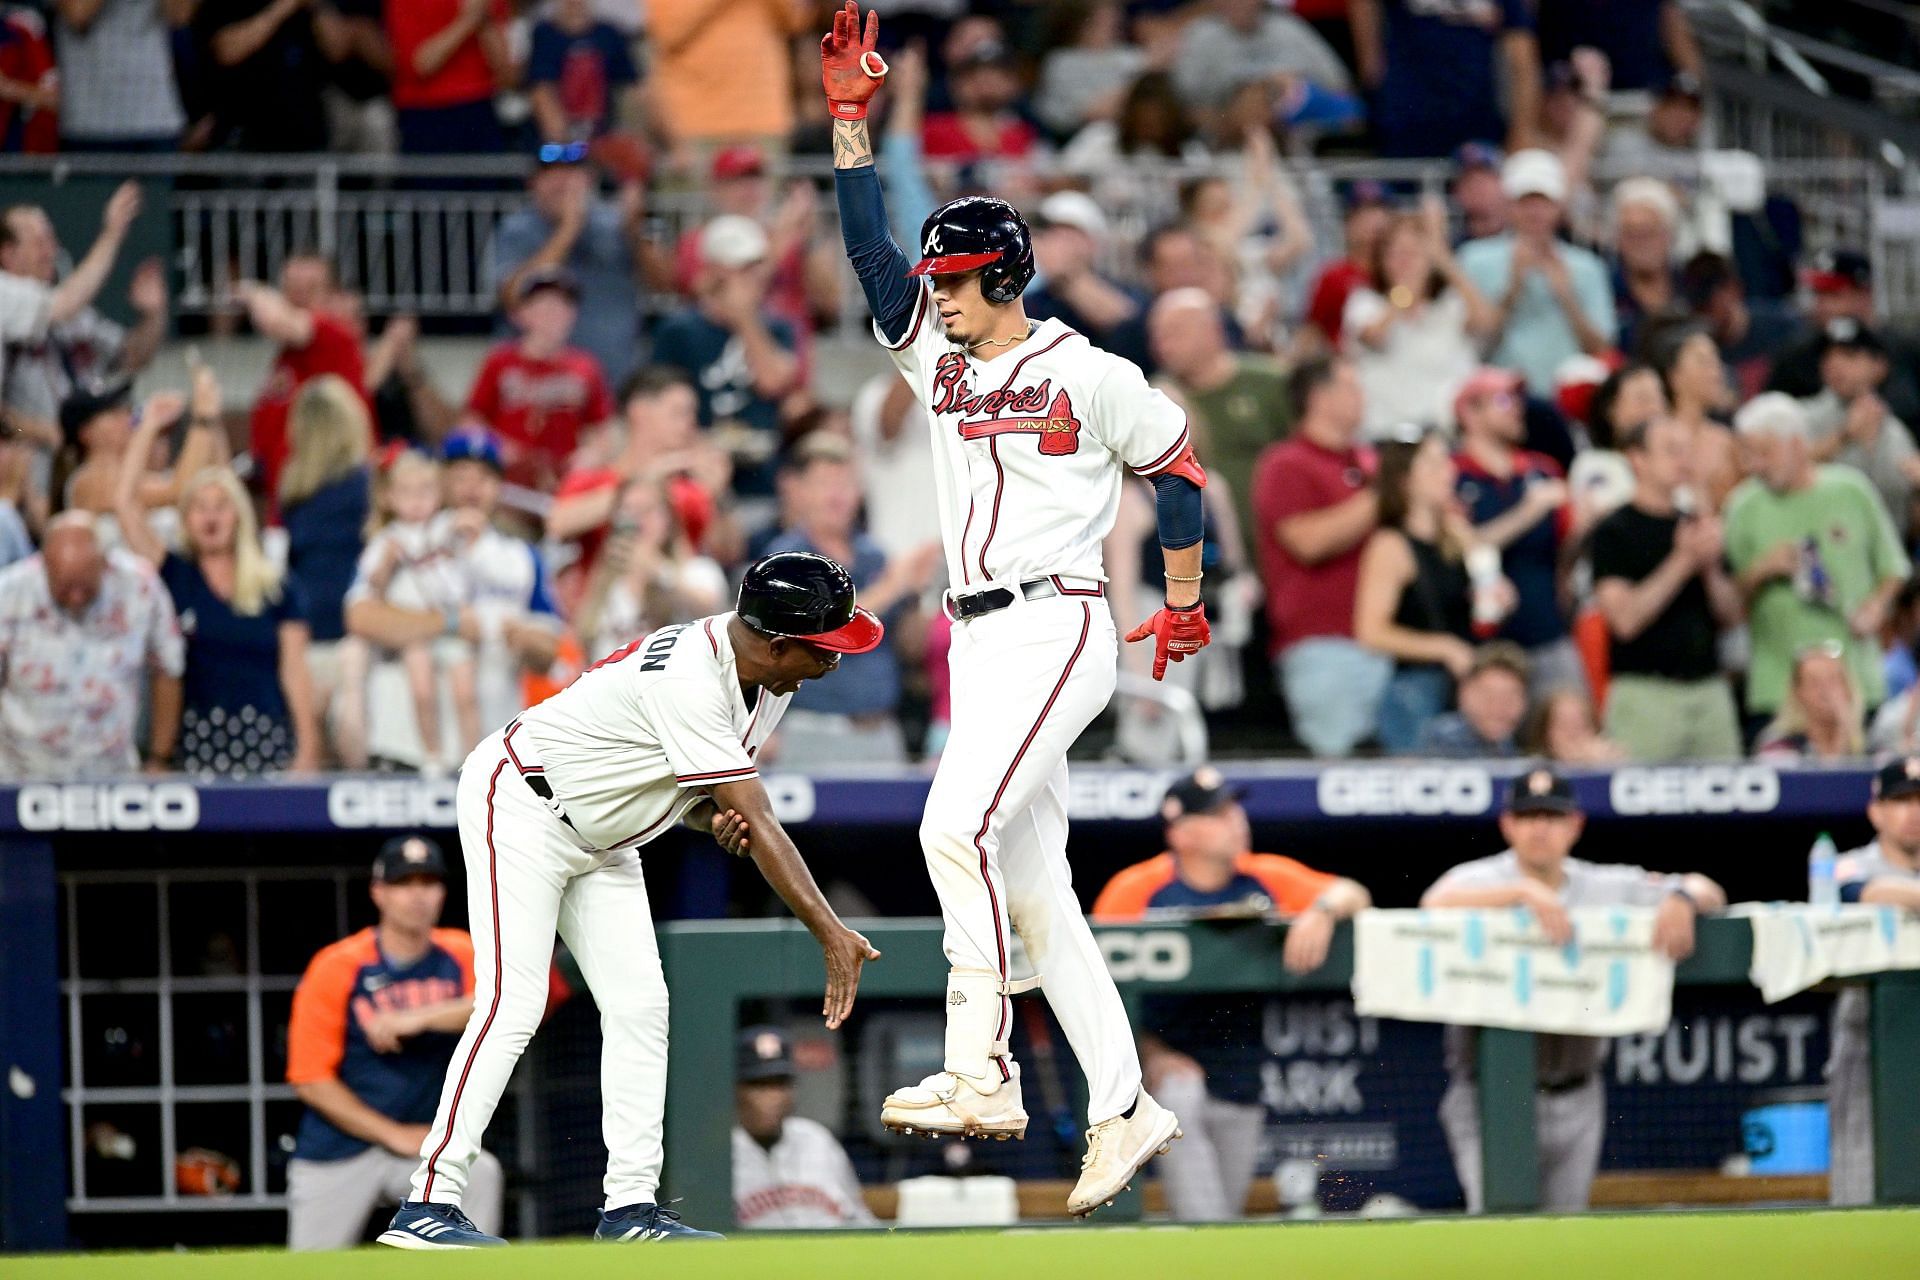 After an offseason of work, Vaughn Grissom looking to show Braves